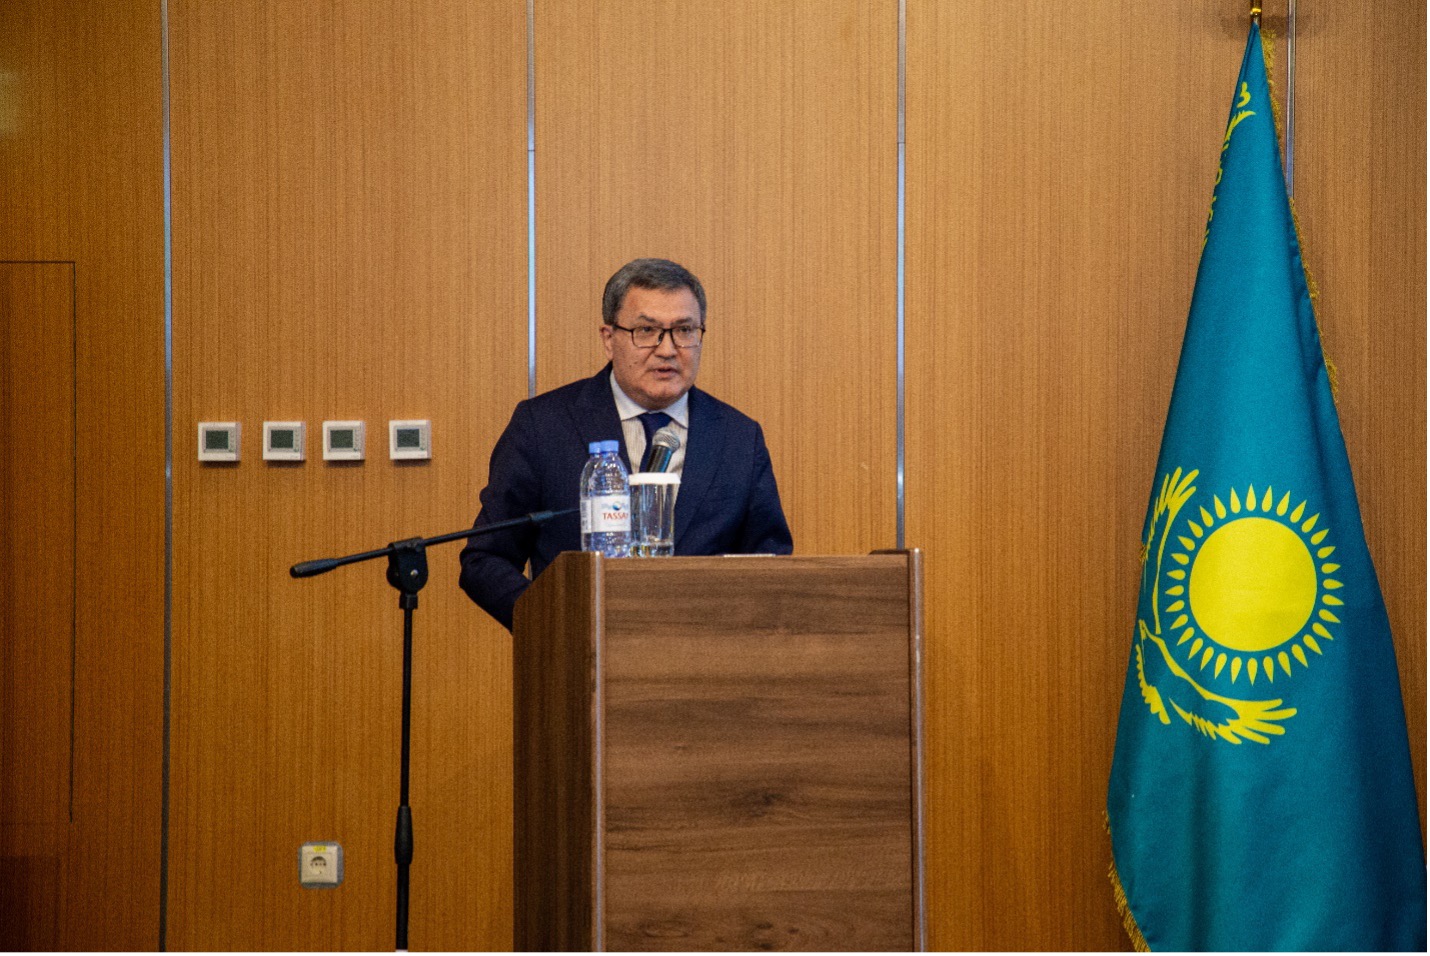 Kairat Maxutov, Chairman of the Board of “Samruk-Energy” JSC, participates in extended meeting of Ministry of Energy